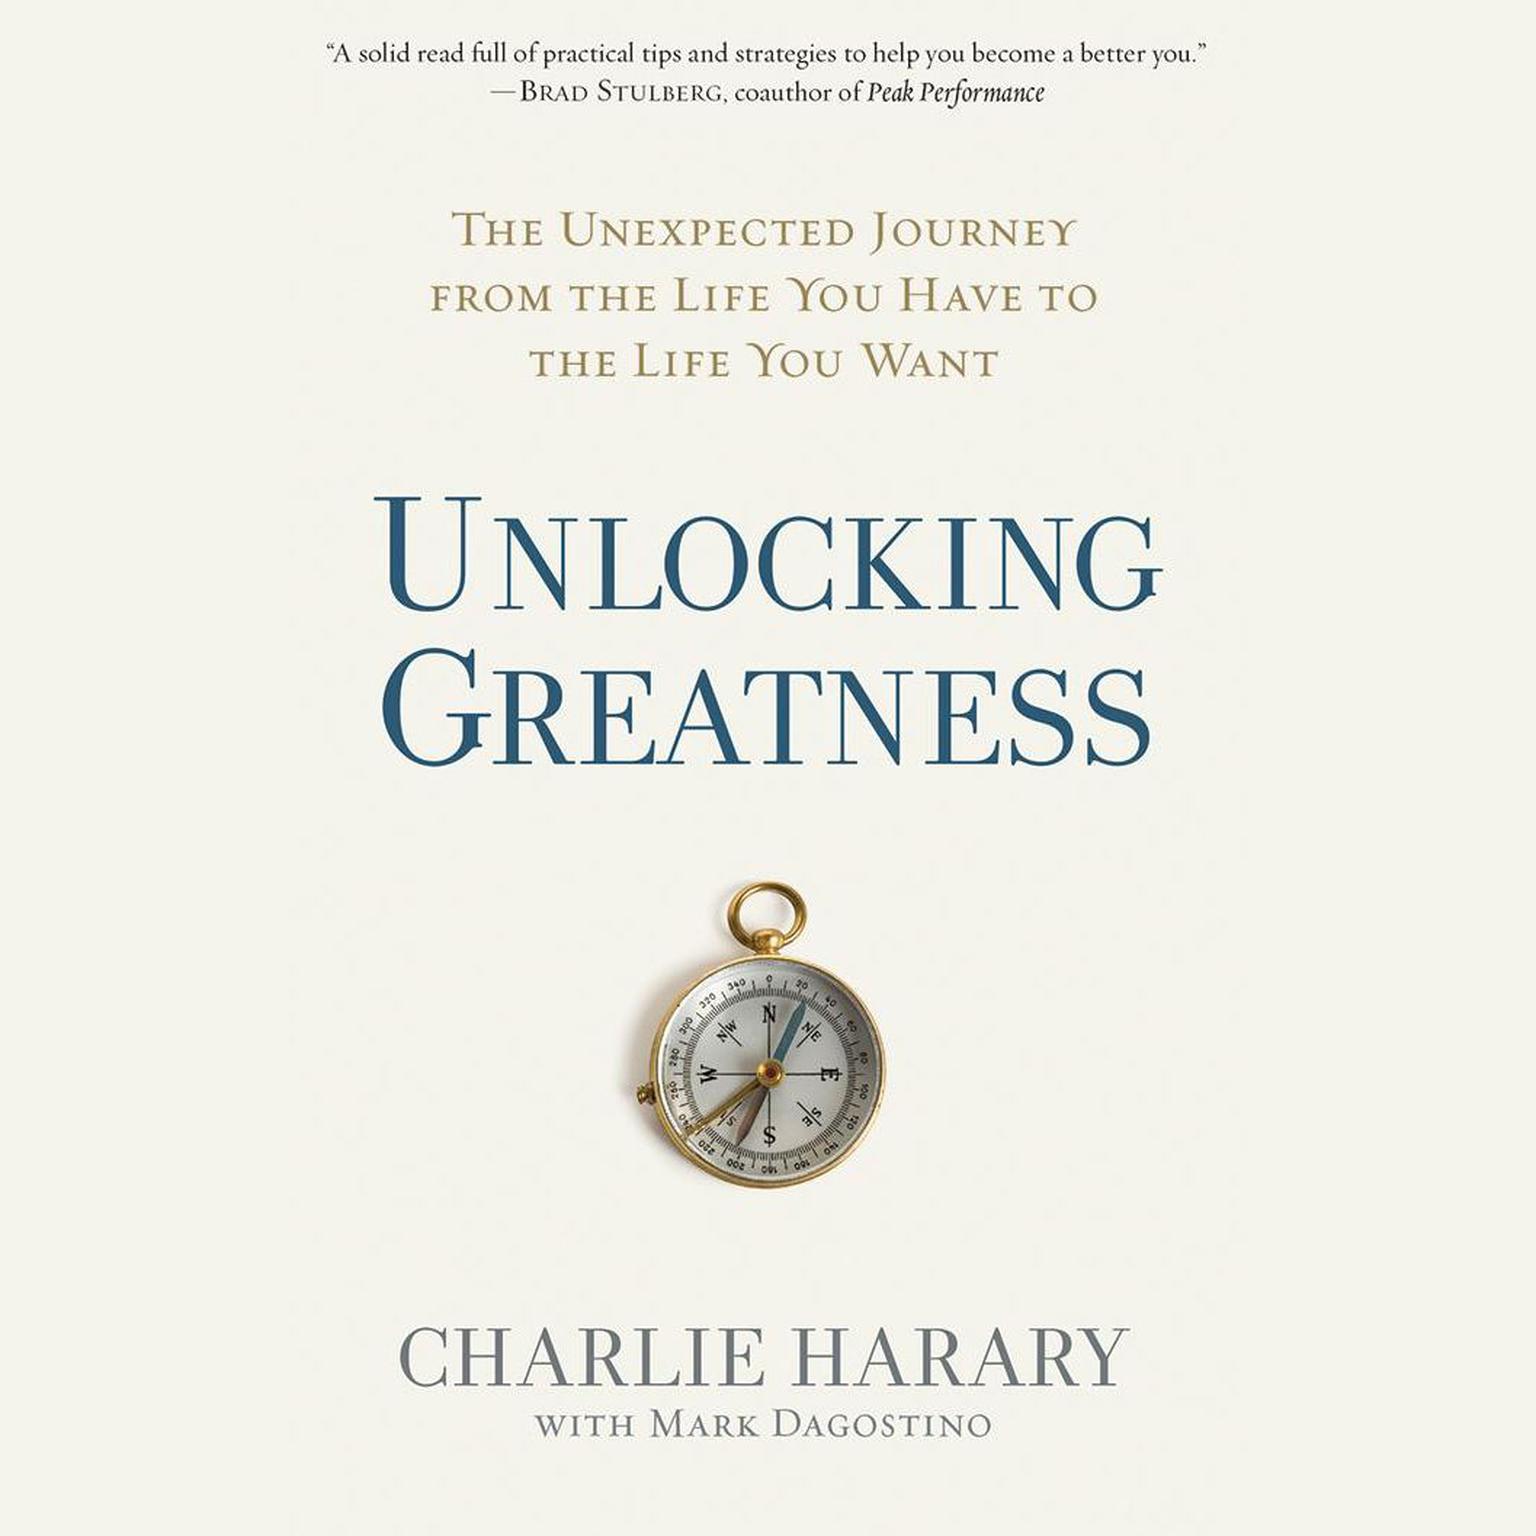 Unlocking Greatness: The Unexpected Journey from the Life You Have to the Life You Want Audiobook, by Charlie Harary